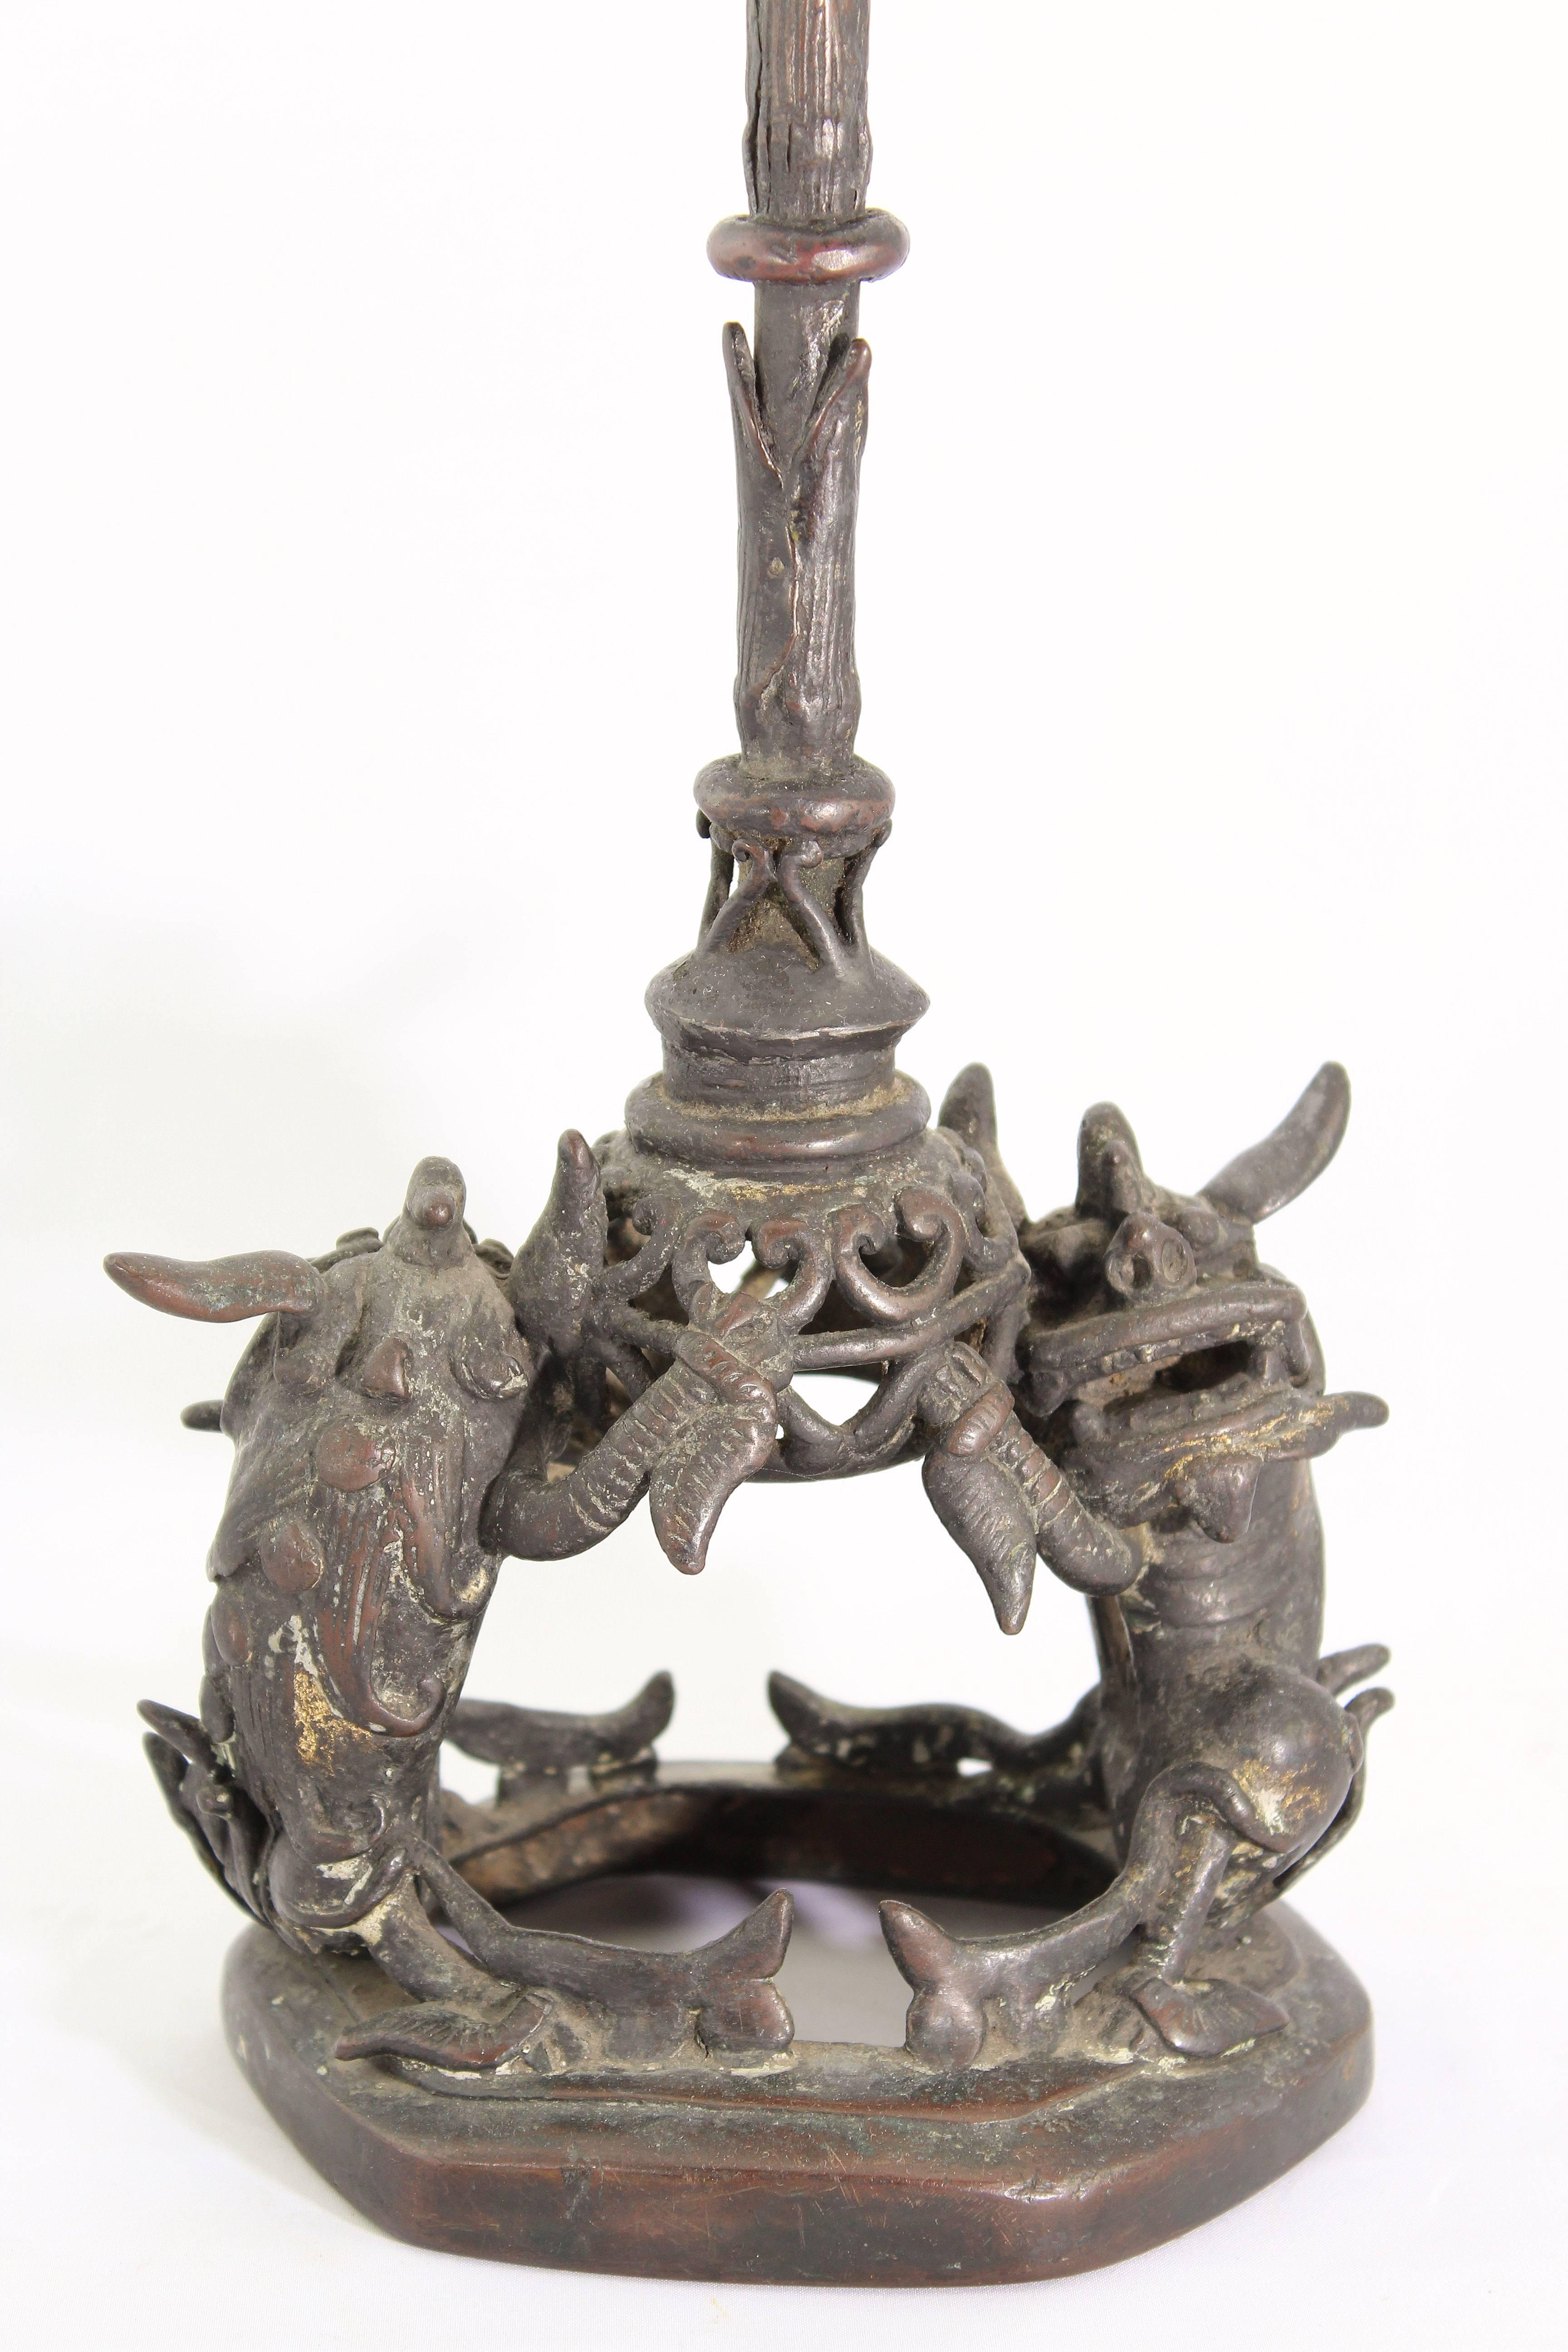 Ming period temple bronze candle pricket, circa 16th Century.

Whimsical dragon food dogs holding a bamboo candleholder.

Measures: Height 20 inches,
width 6 inches.

Excellent condition.